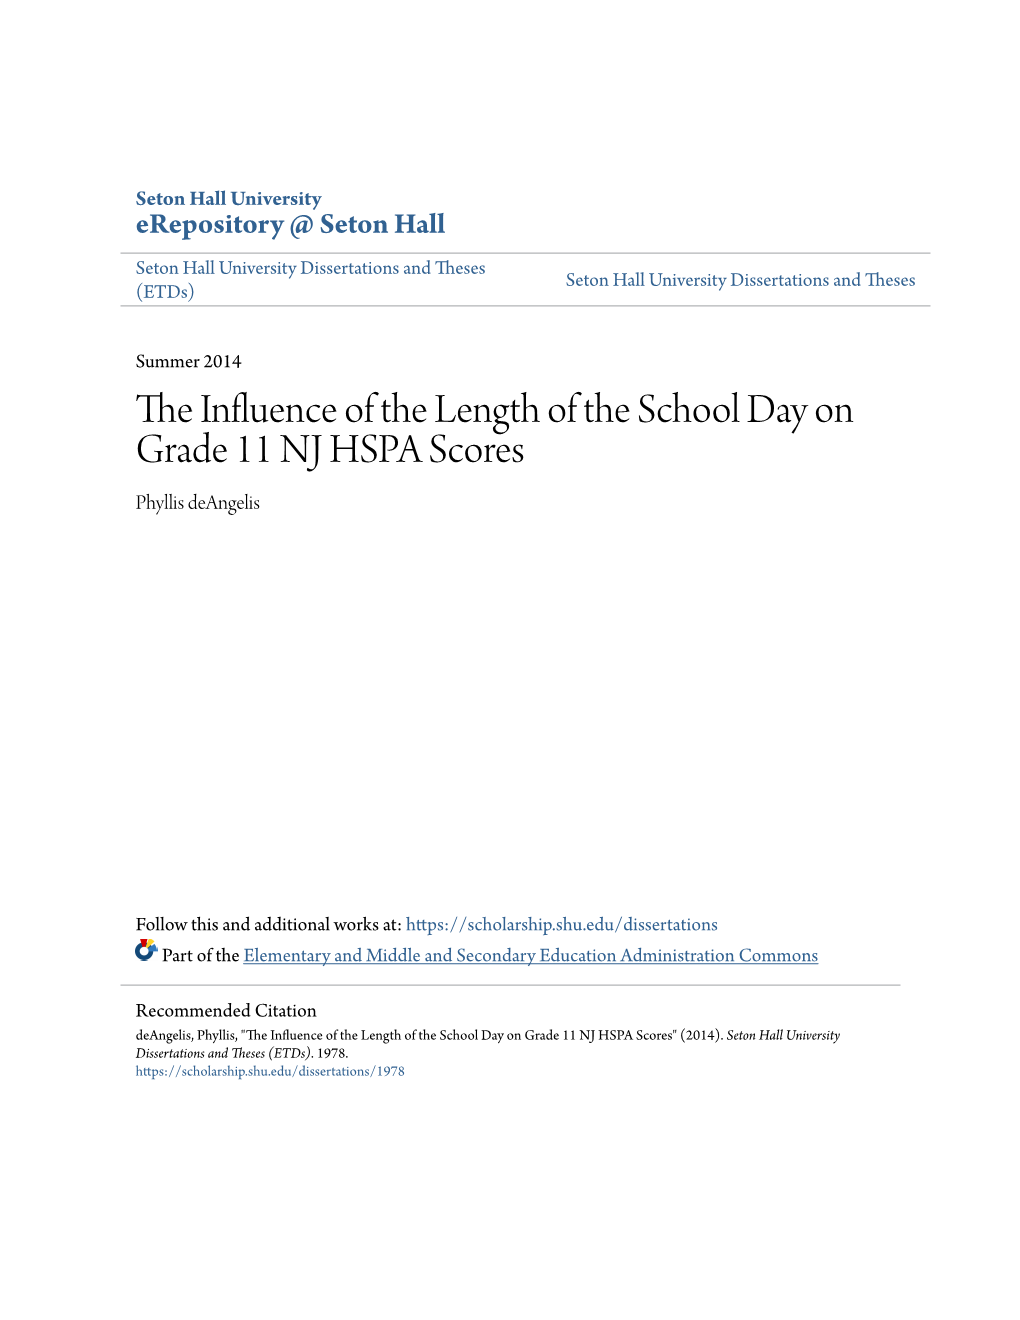 The Influence of the Length of the School Day on Grade 11 Nj Hspa Scores